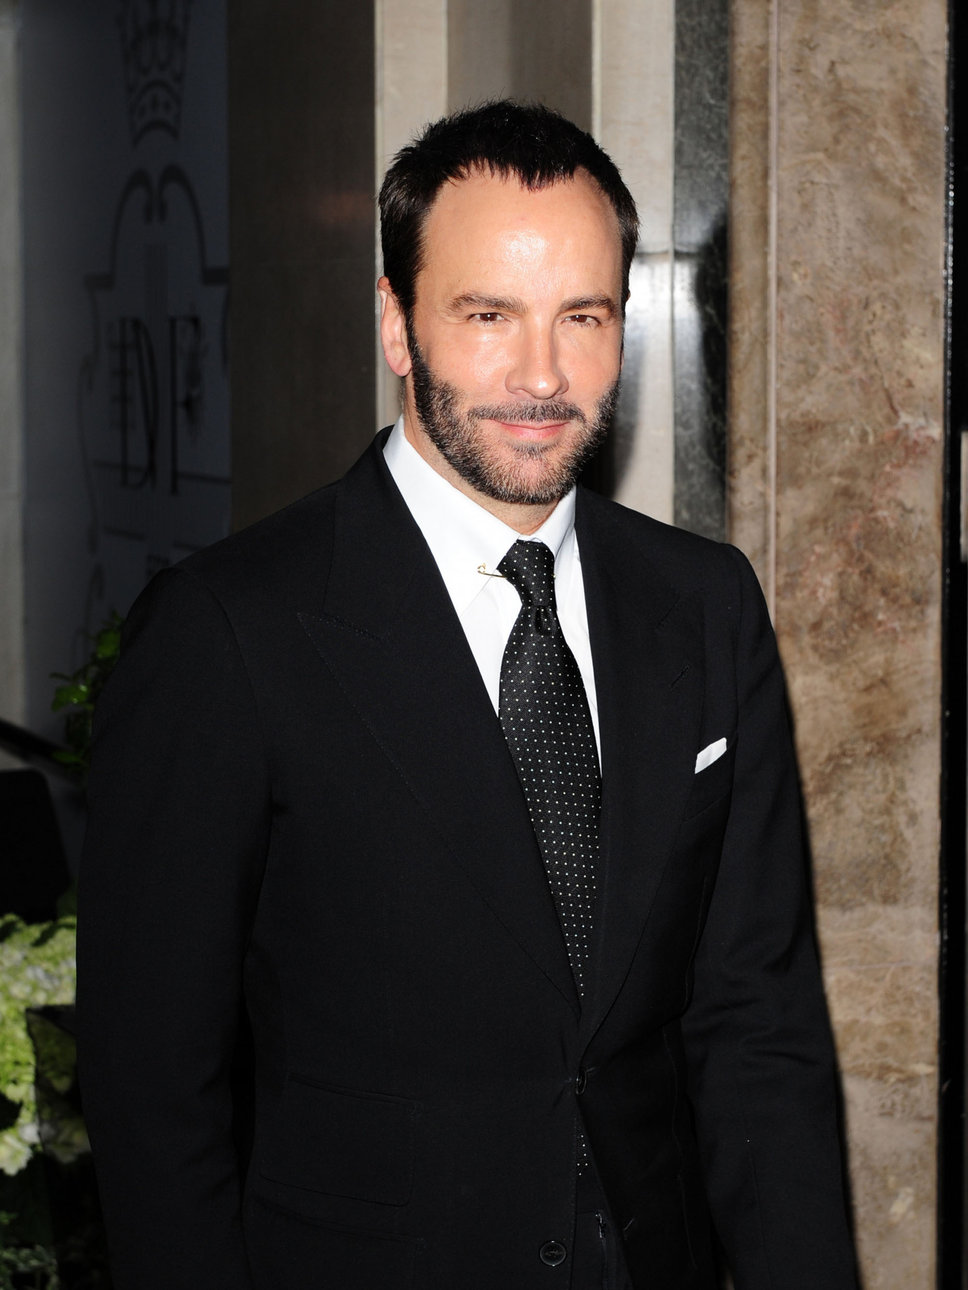 MY FASHION MANUAL: Tom Ford is set to debut a men’s grooming line this fall